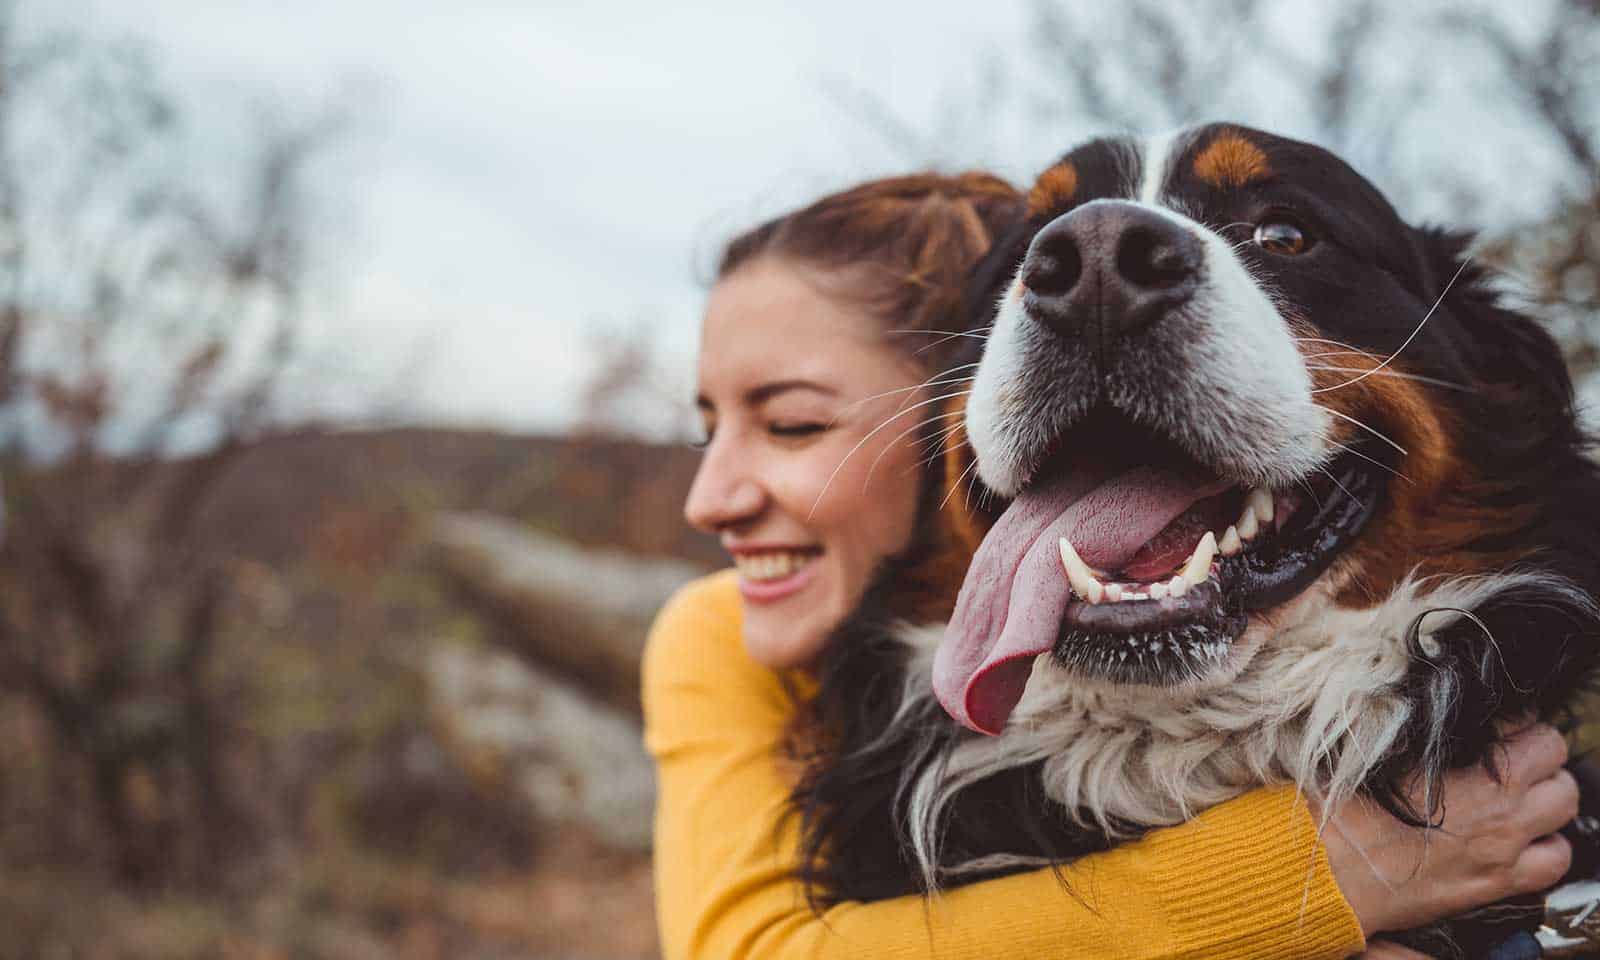 A woman hugging her smiling dog